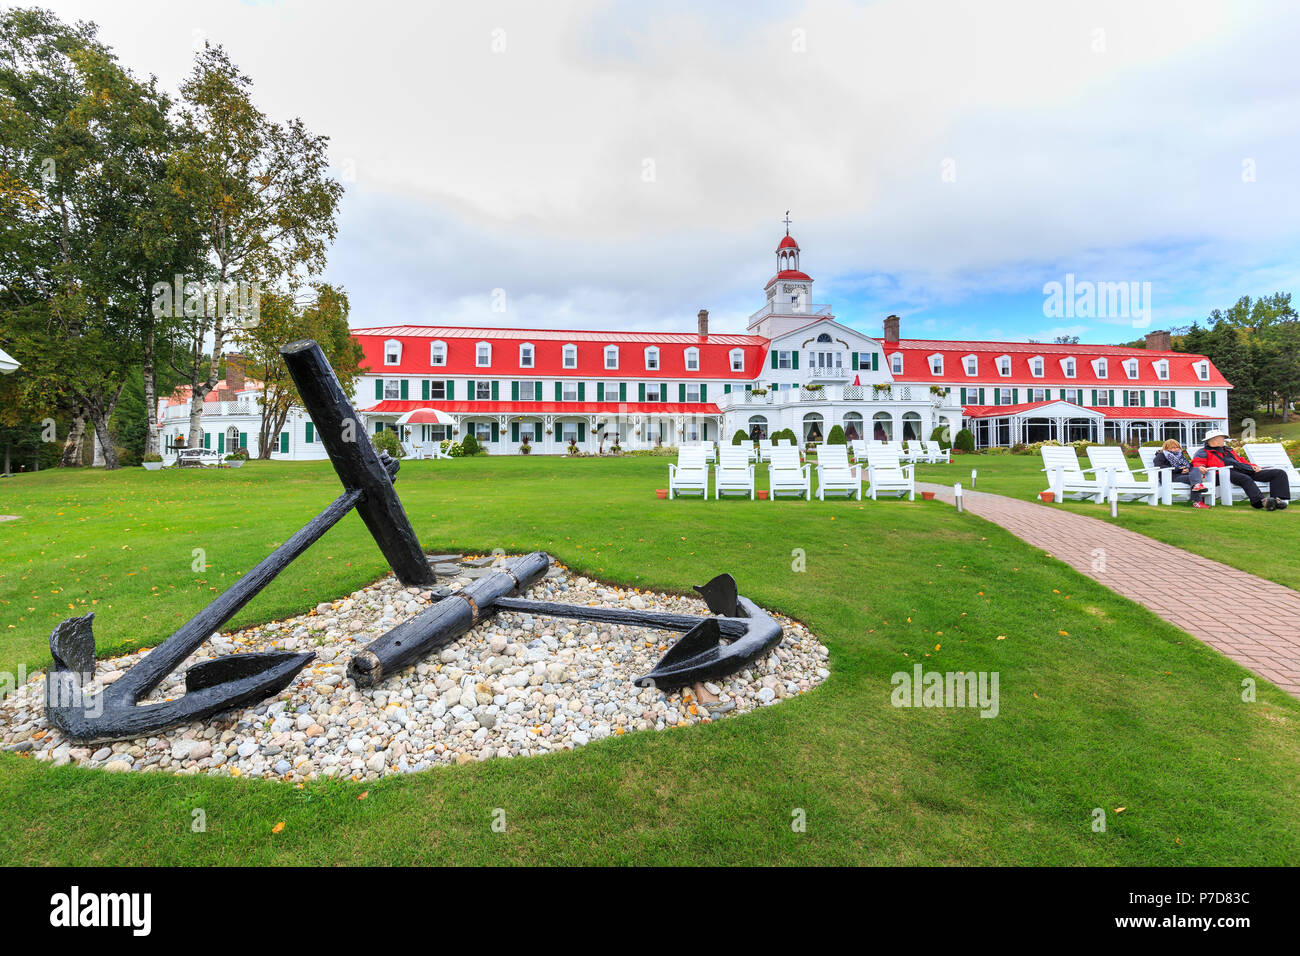 Hotel Tadoussac at the mouth of the Saguenay Fjord into the St. Lawrence River, Tadoussac, Québec Province, Canada Stock Photo